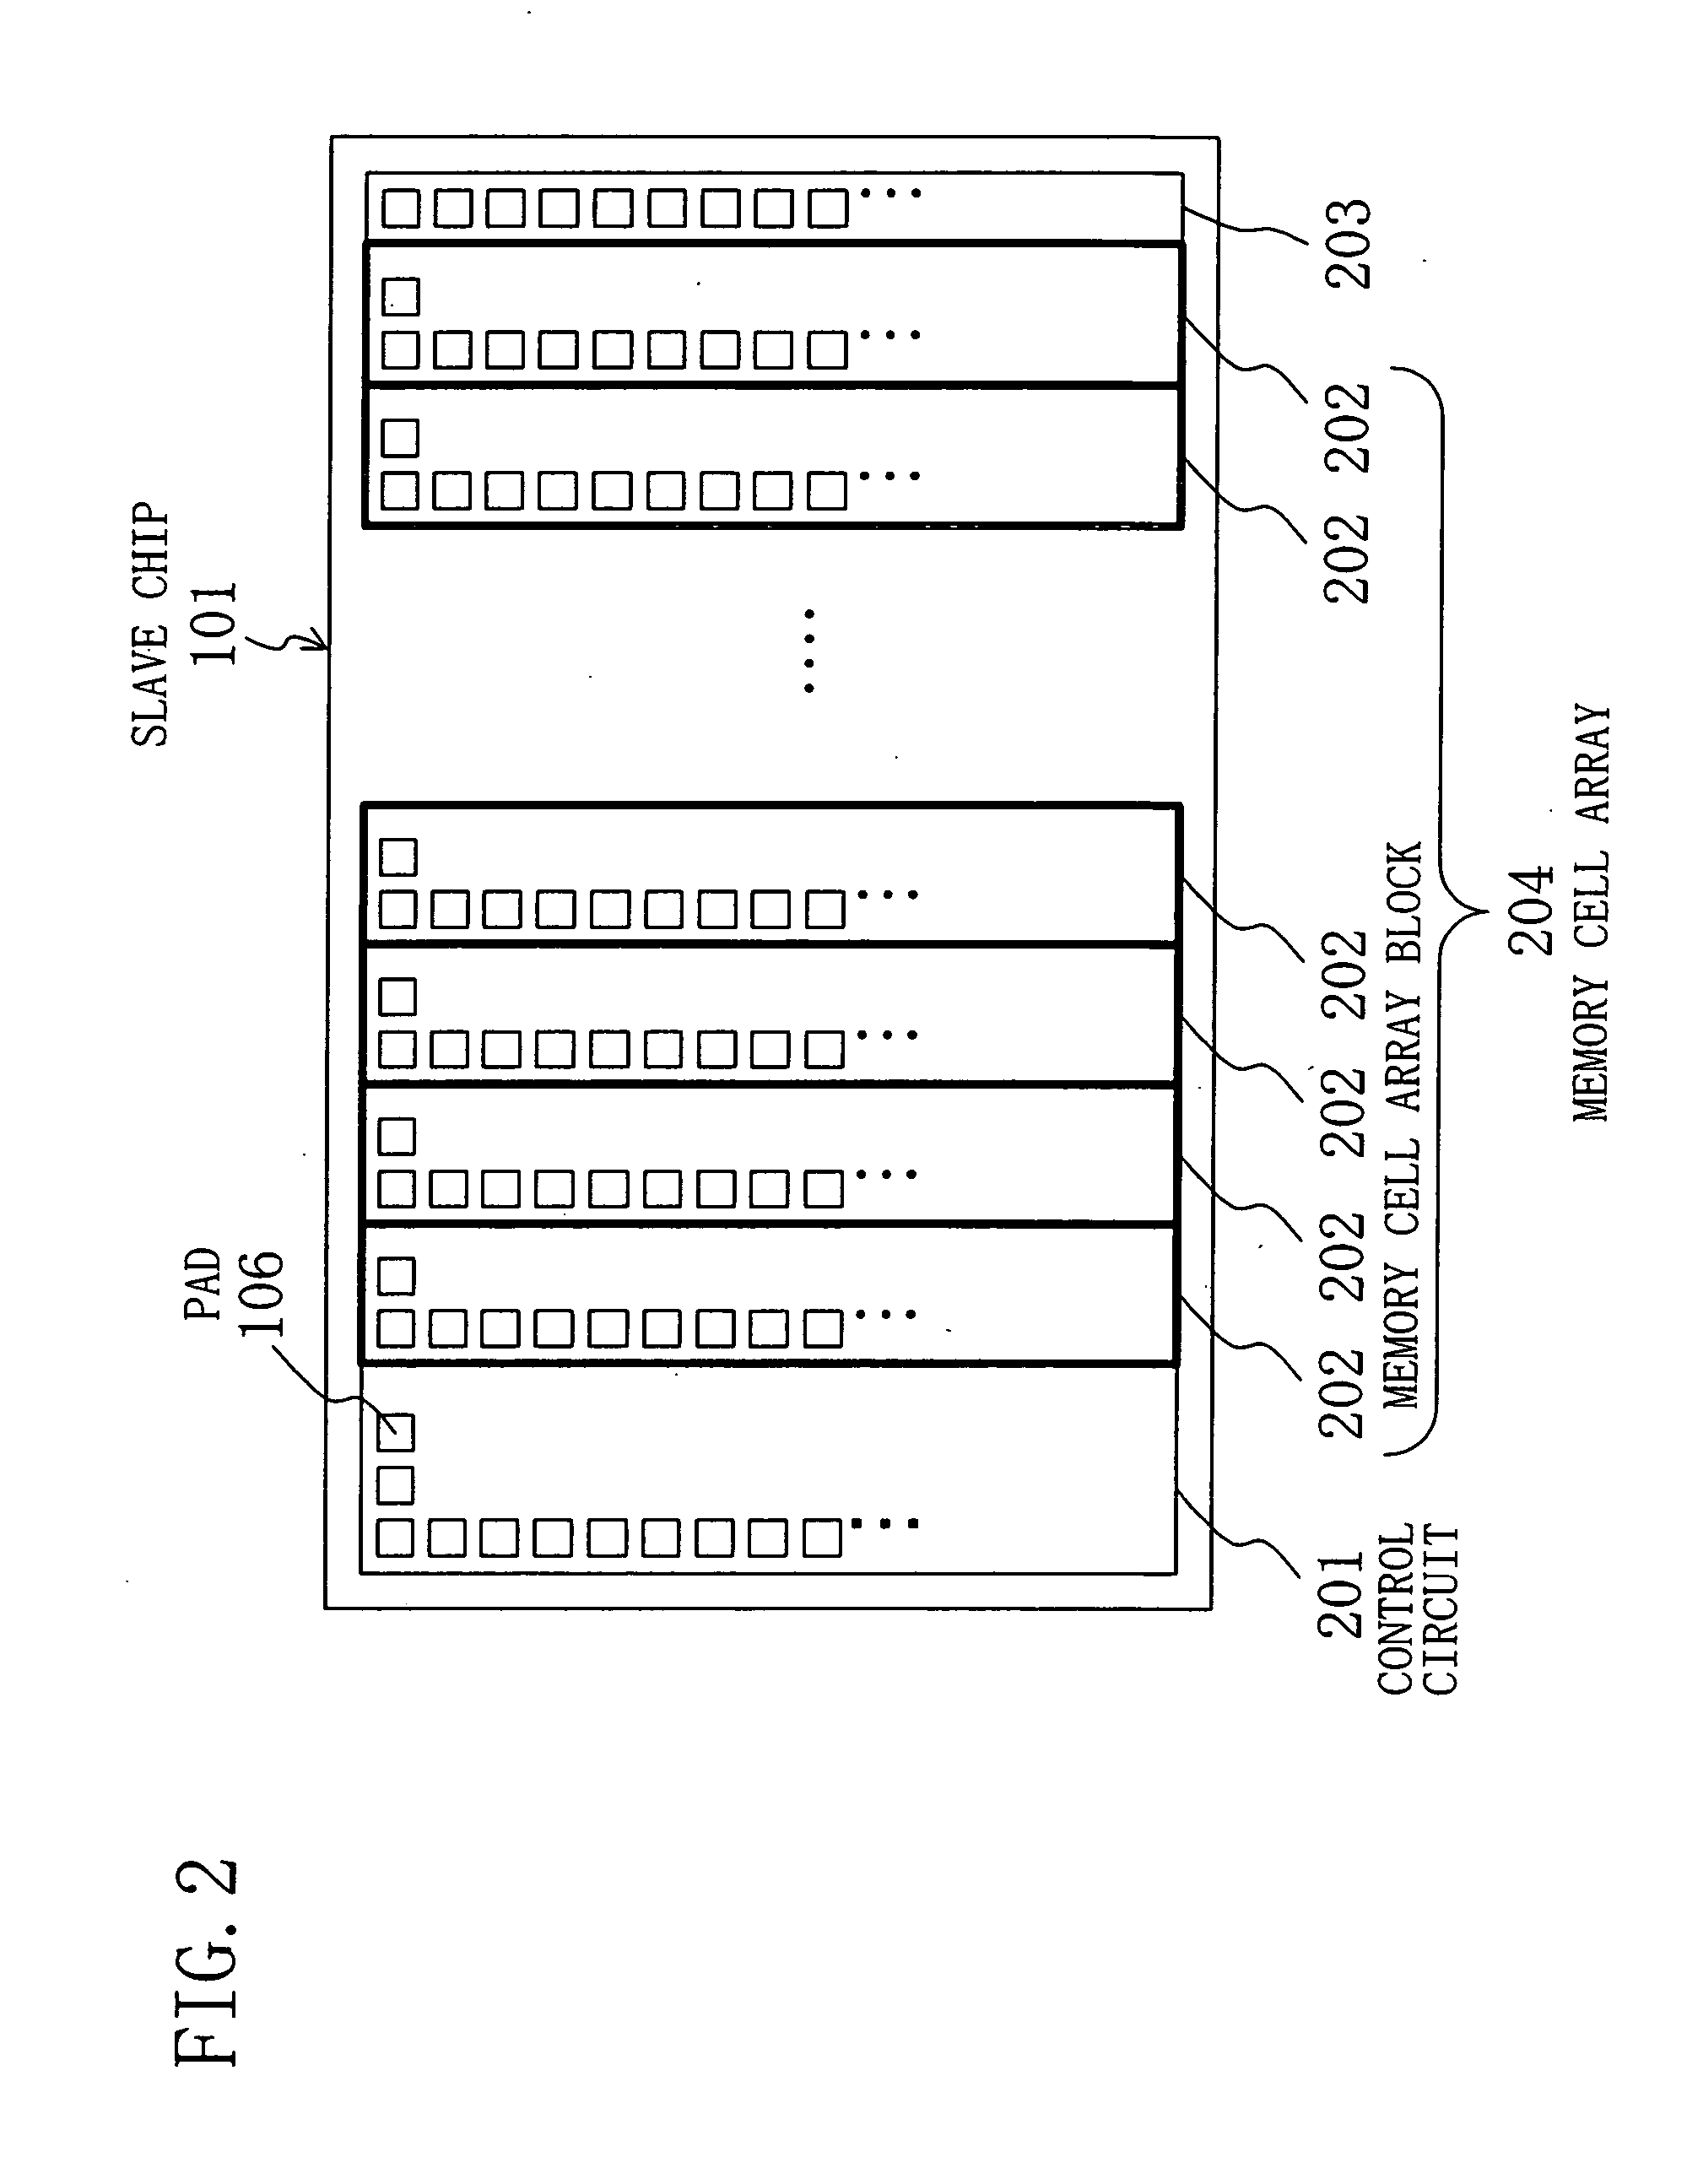 Semiconductor memory device and multi-chip module comprising the semiconductor memory device